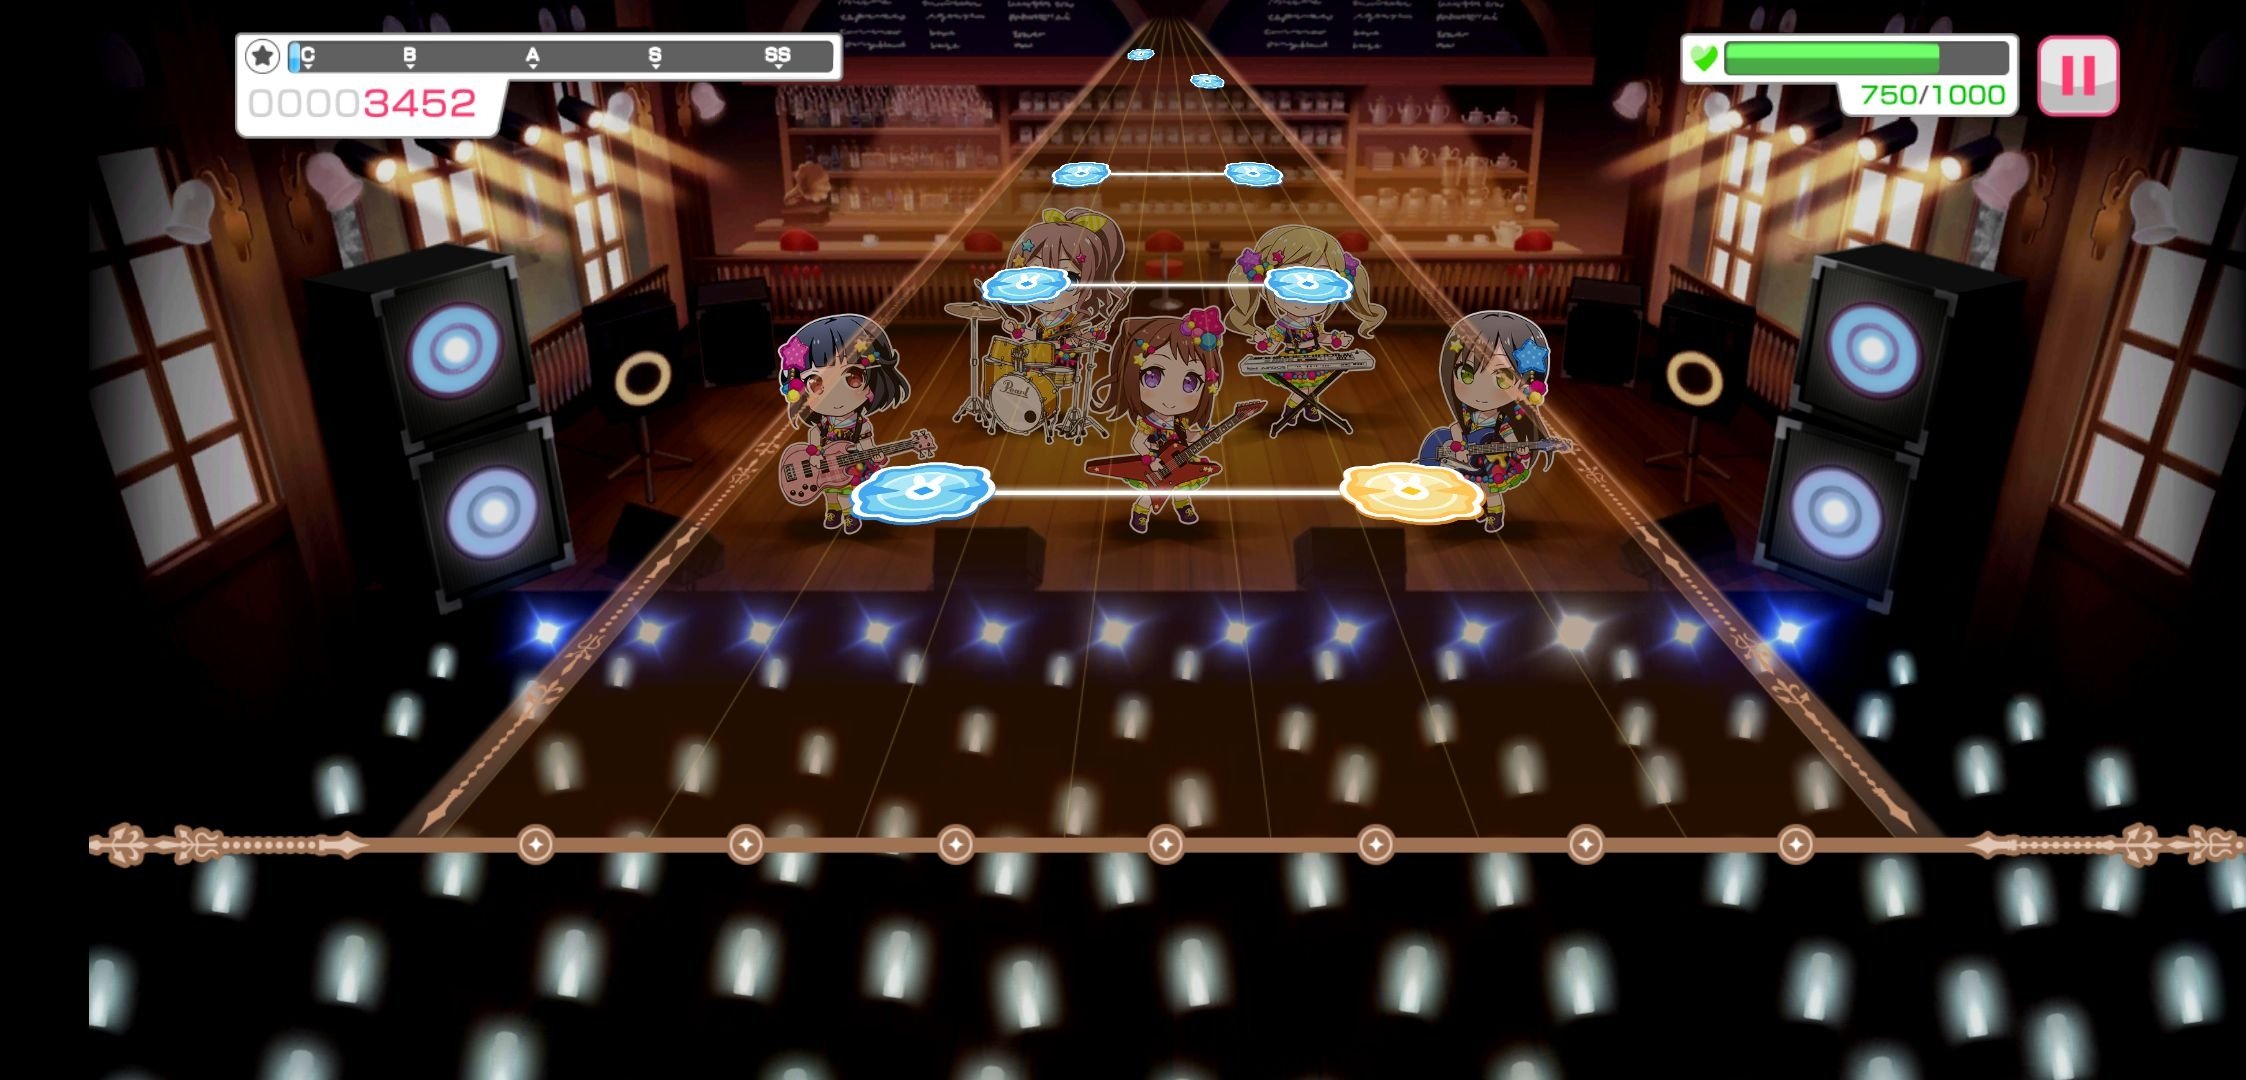 Download and play BanG Dream! Girls Band Party! on PC & Mac